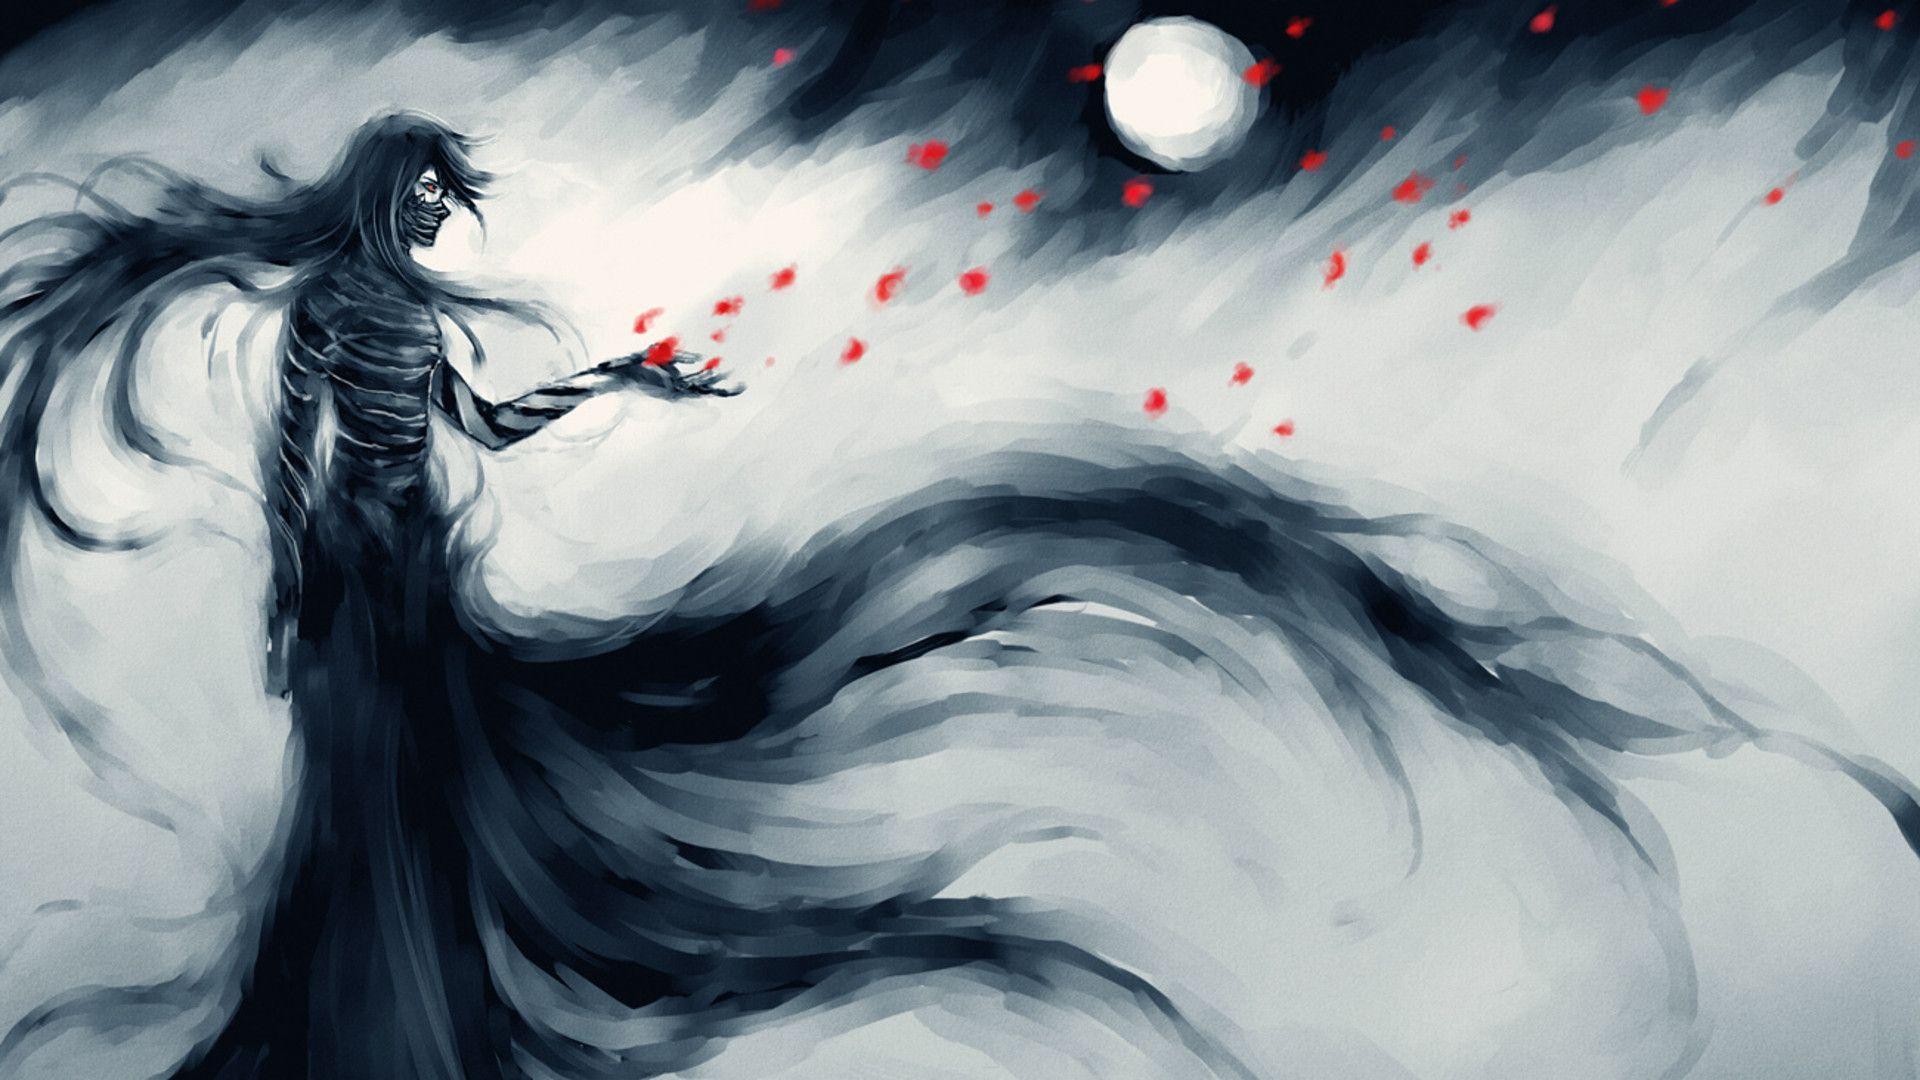 Bleach Anime Wallpapers 1920x1080 Wallpapers